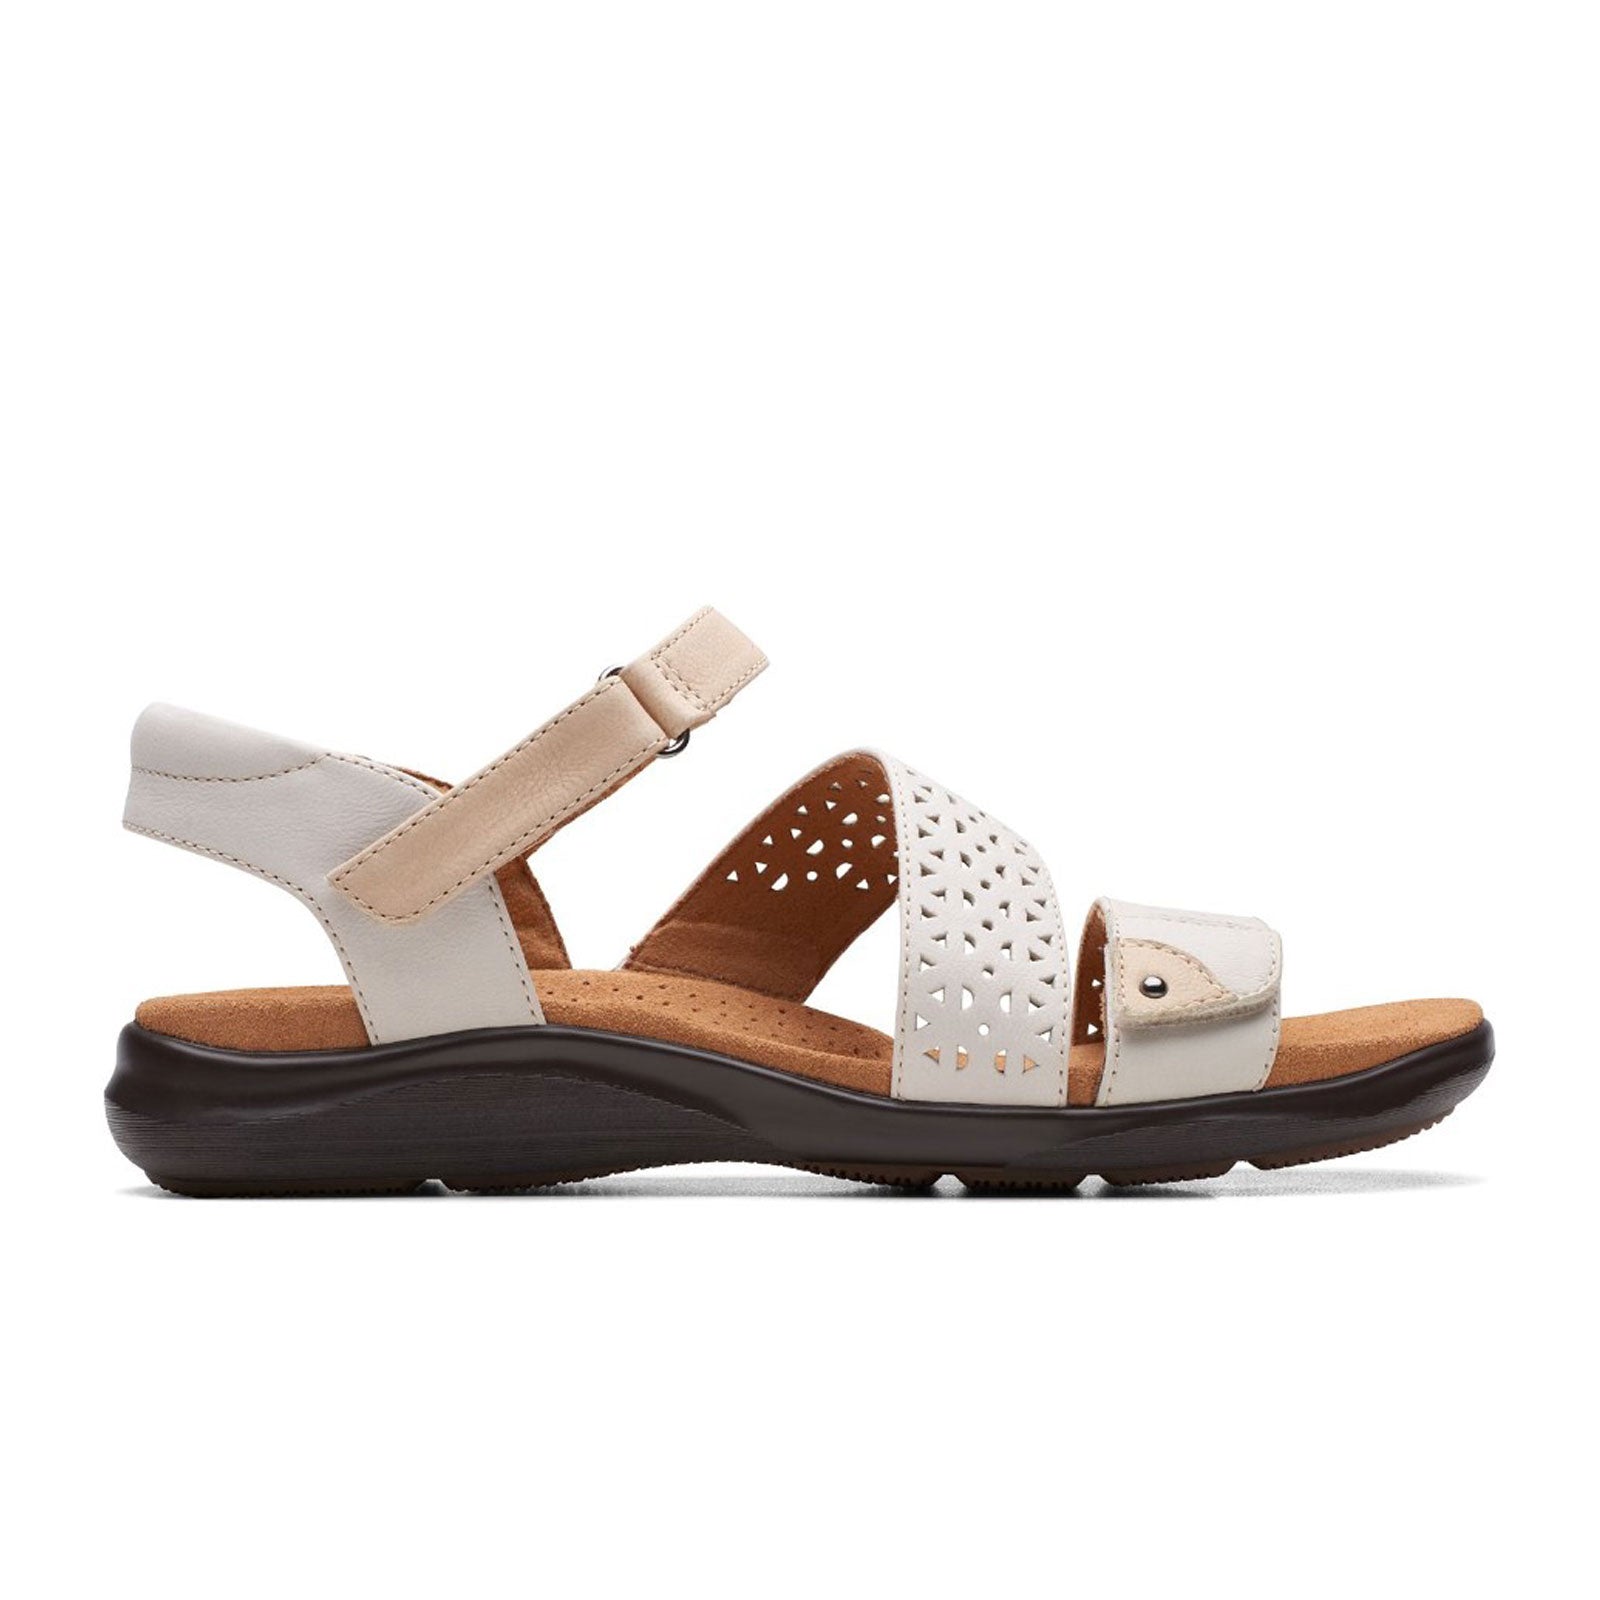 Clarks Collection Adjustable Sandals - Brynn Step - QVC.com